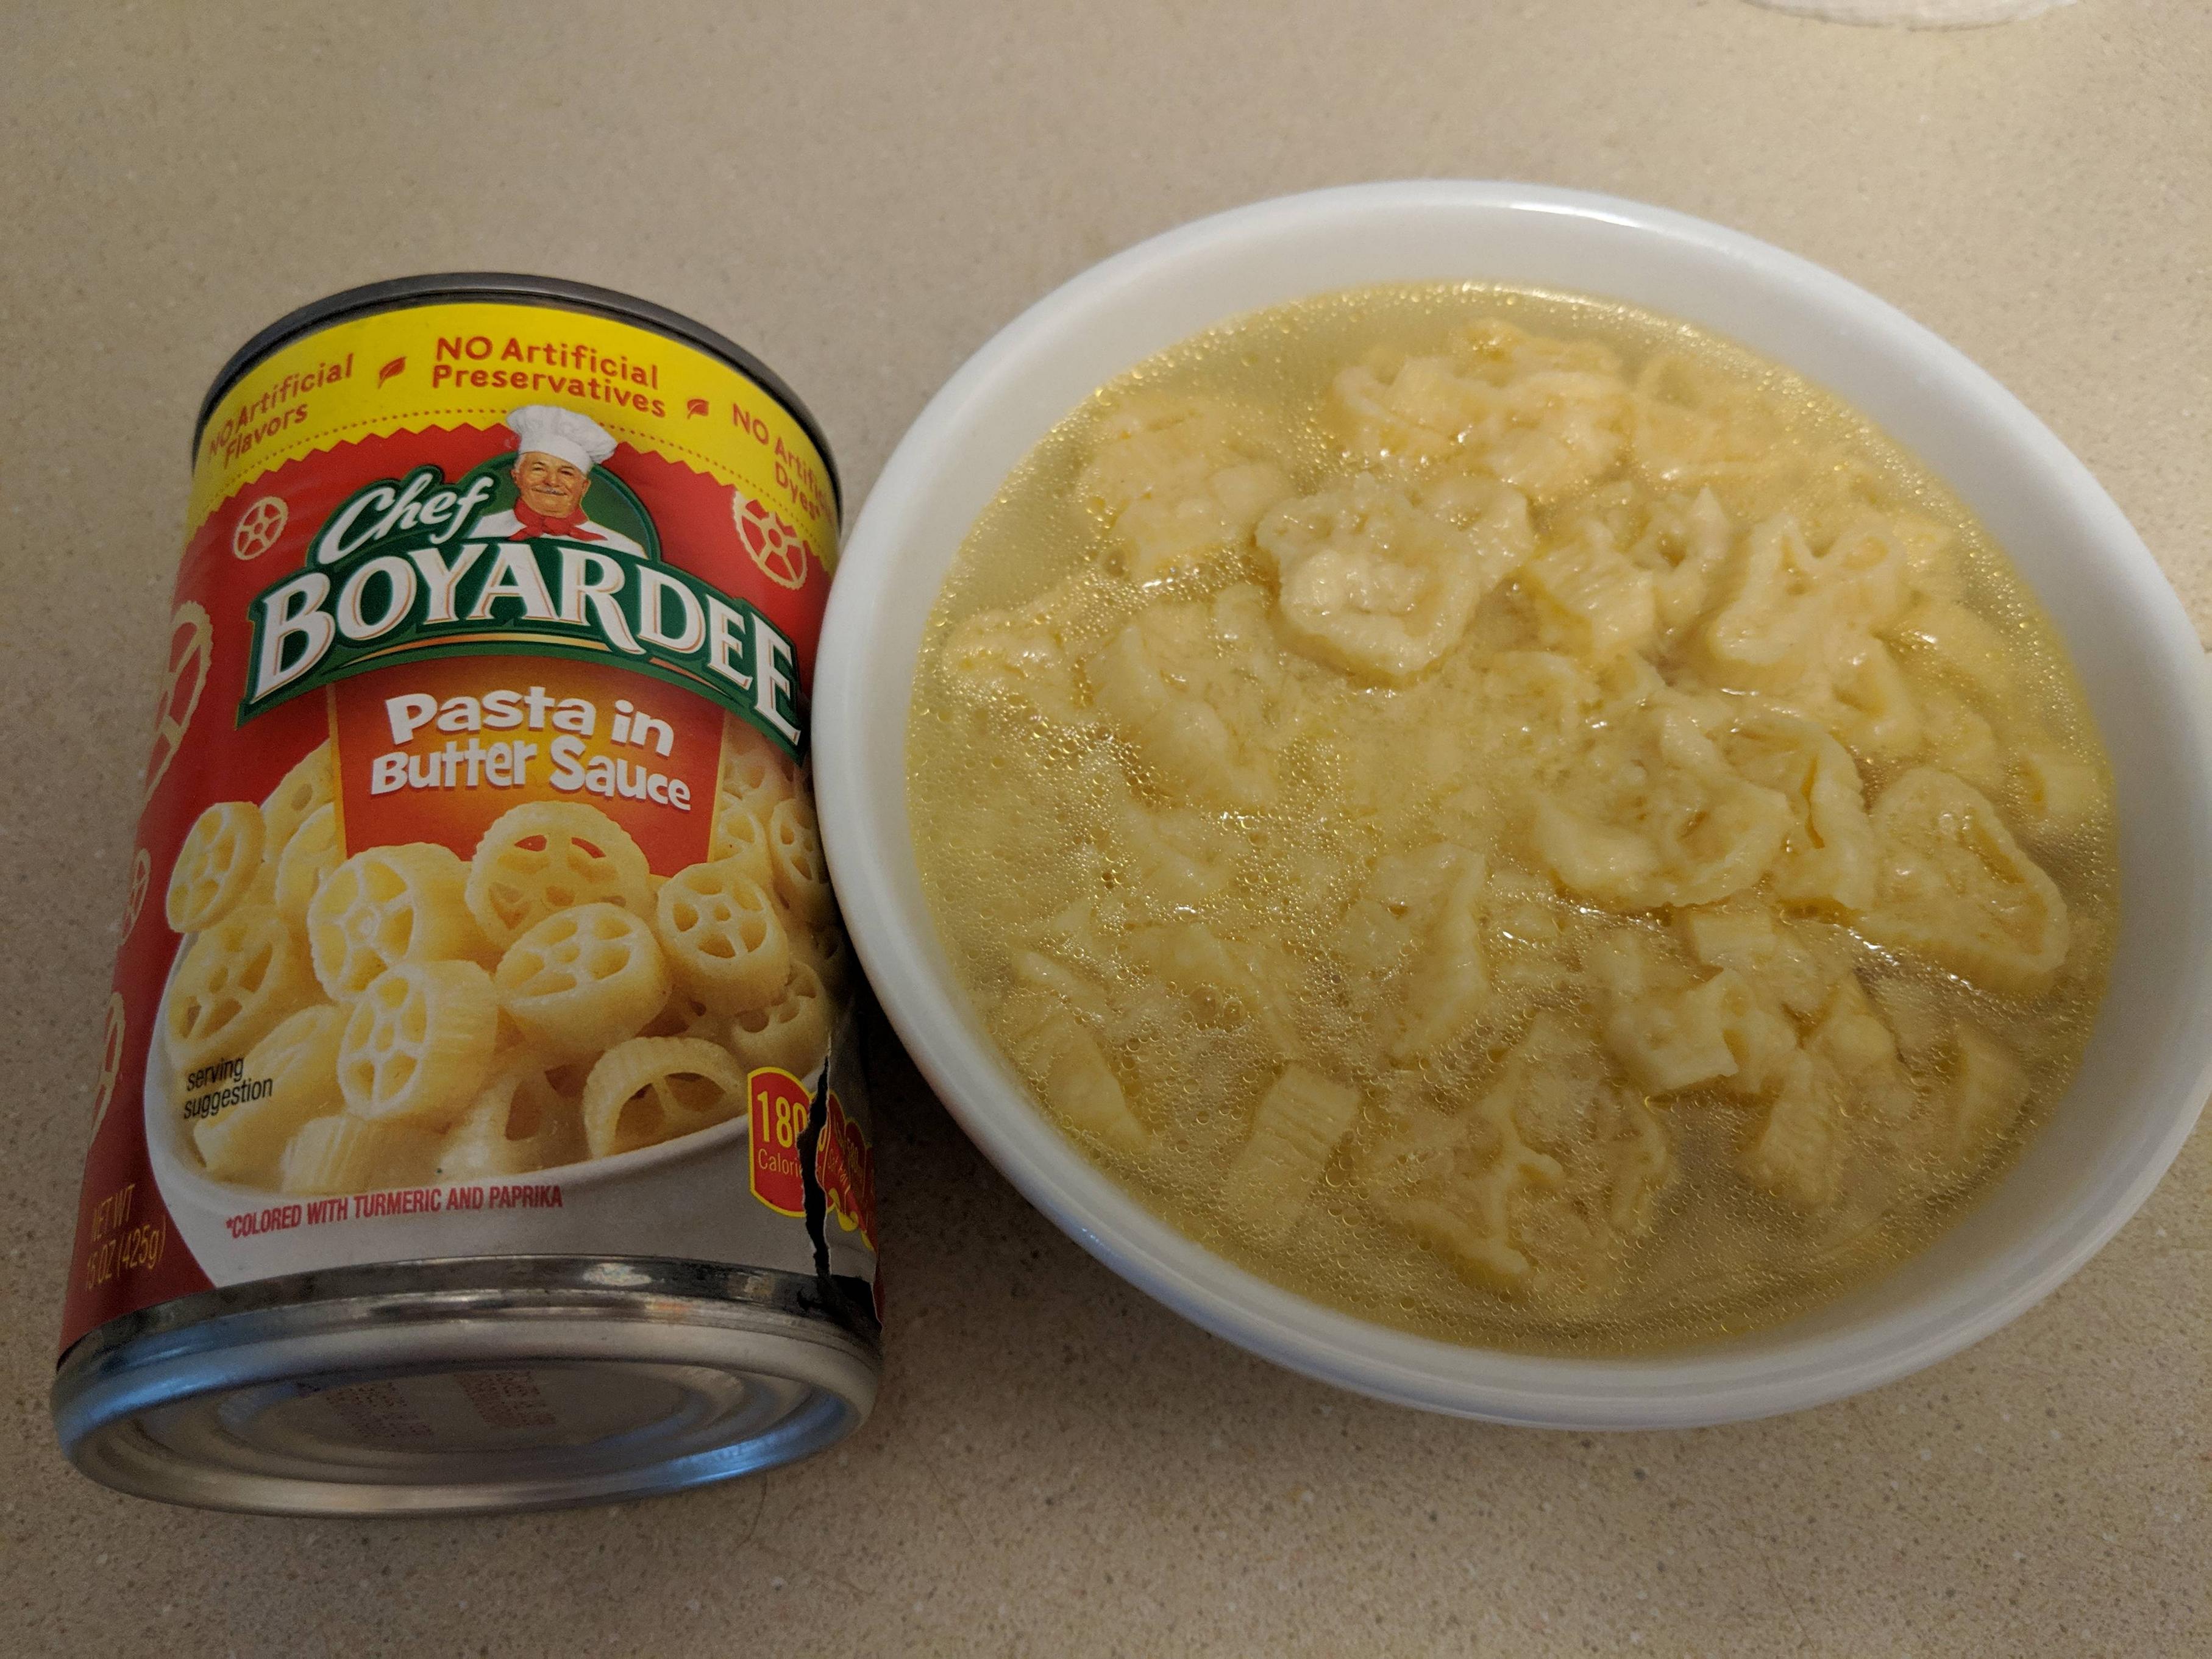 Expectation vs. Reality - junk foodno Artificial Preservative Chef Boyardee Pasta in Butter Sauce